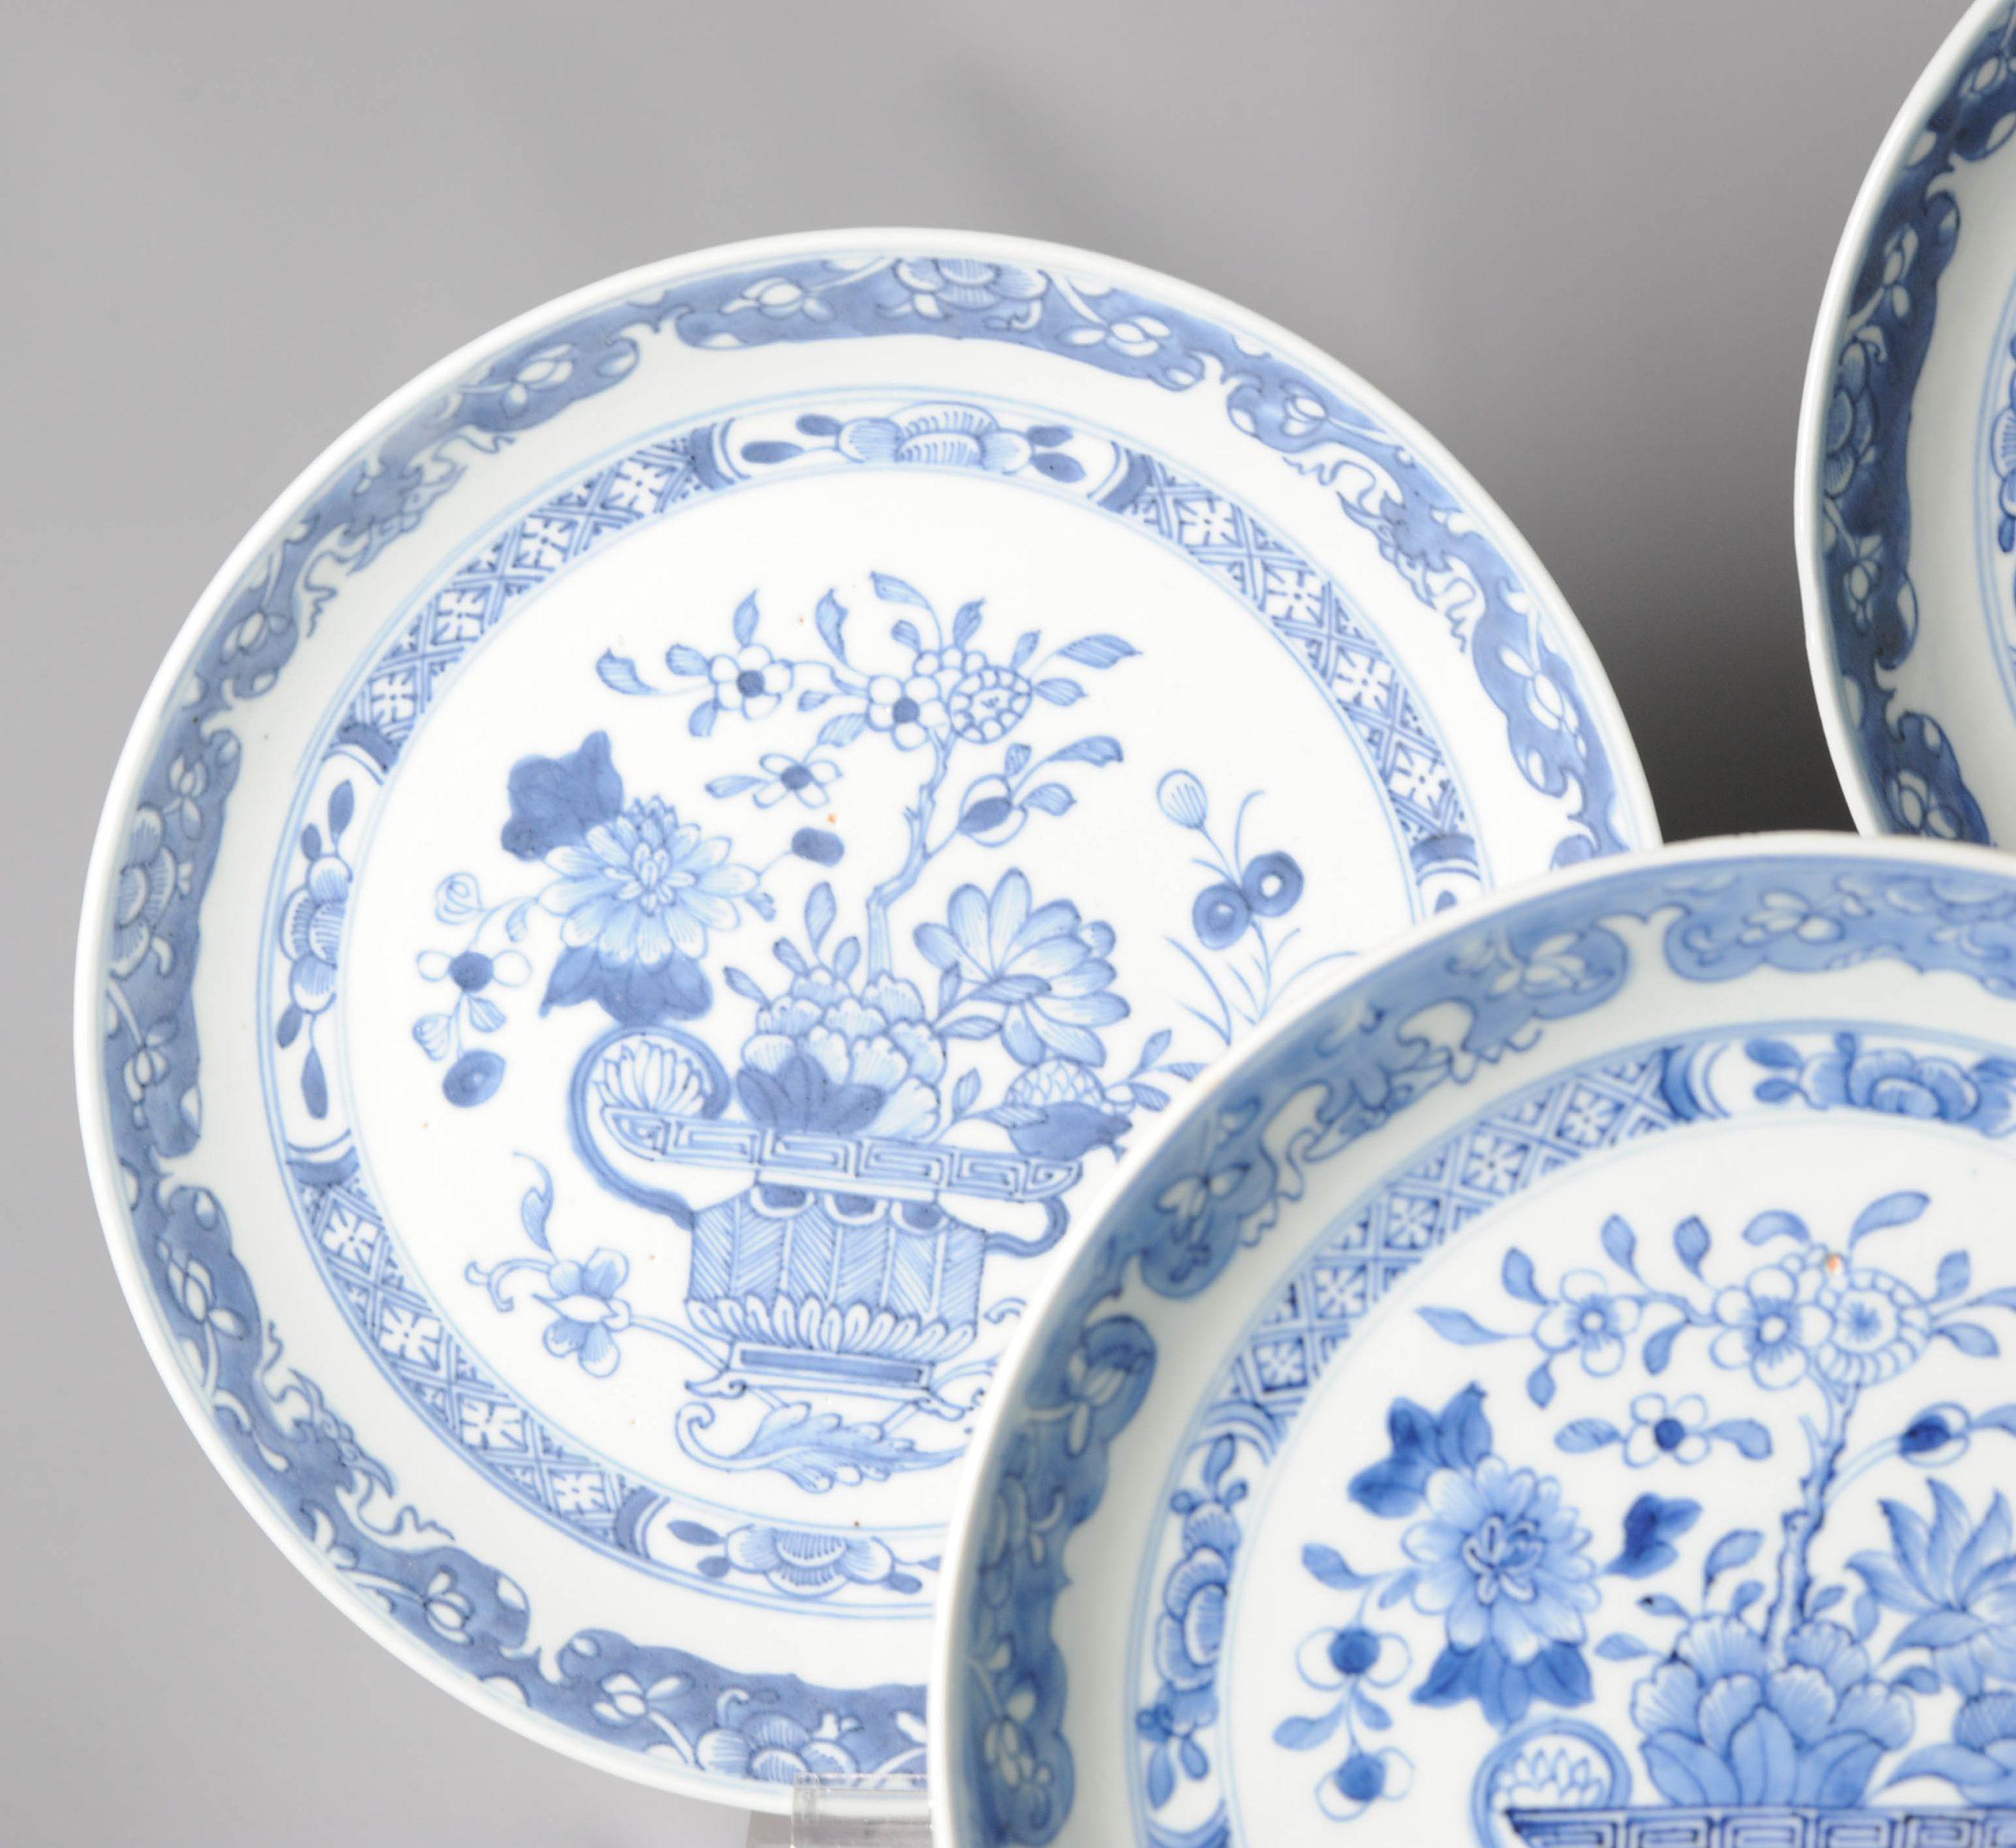 A very nicely decorated Set of 3 dishes in Blue and white with a lovely and high quality floral scene

Additional information:
Material: Porcelain & Pottery
Color: Blue & White
Region of Origin: China
Emperor: Kangxi (1661-1722), Yongzheng